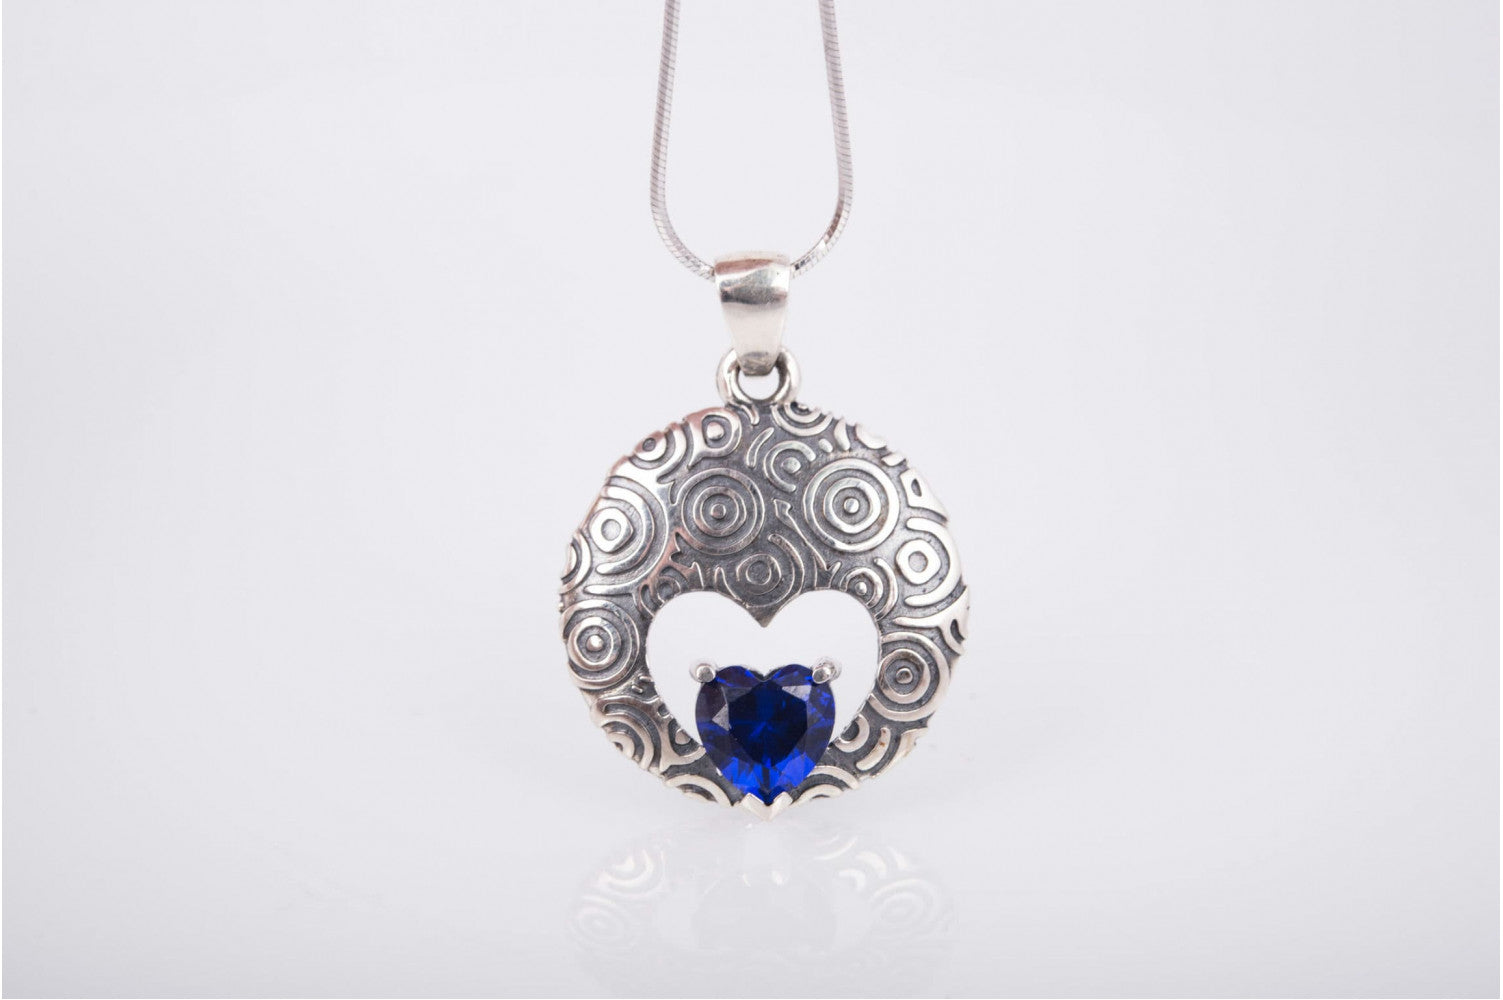 Unique Handcrafted Pendant with ornament and Blue Gem, Sterling Silver Fashion Jewelry - vikingworkshop